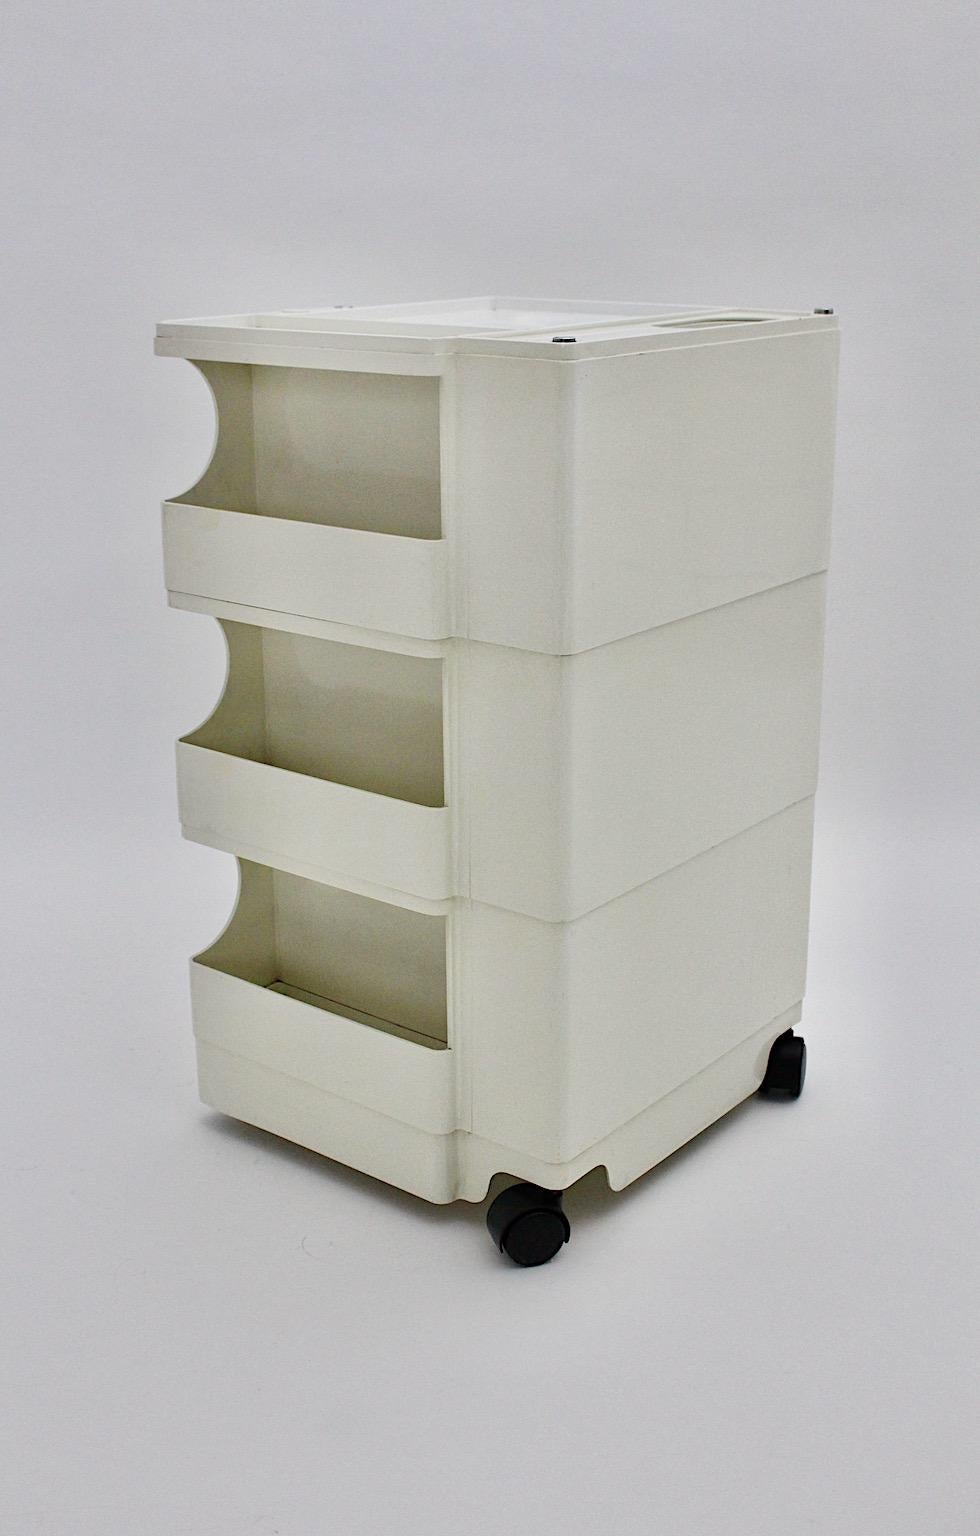 Space Age White Plastic Vintage Storage Trolley Container Joe Colombo 1970 Italy For Sale 5